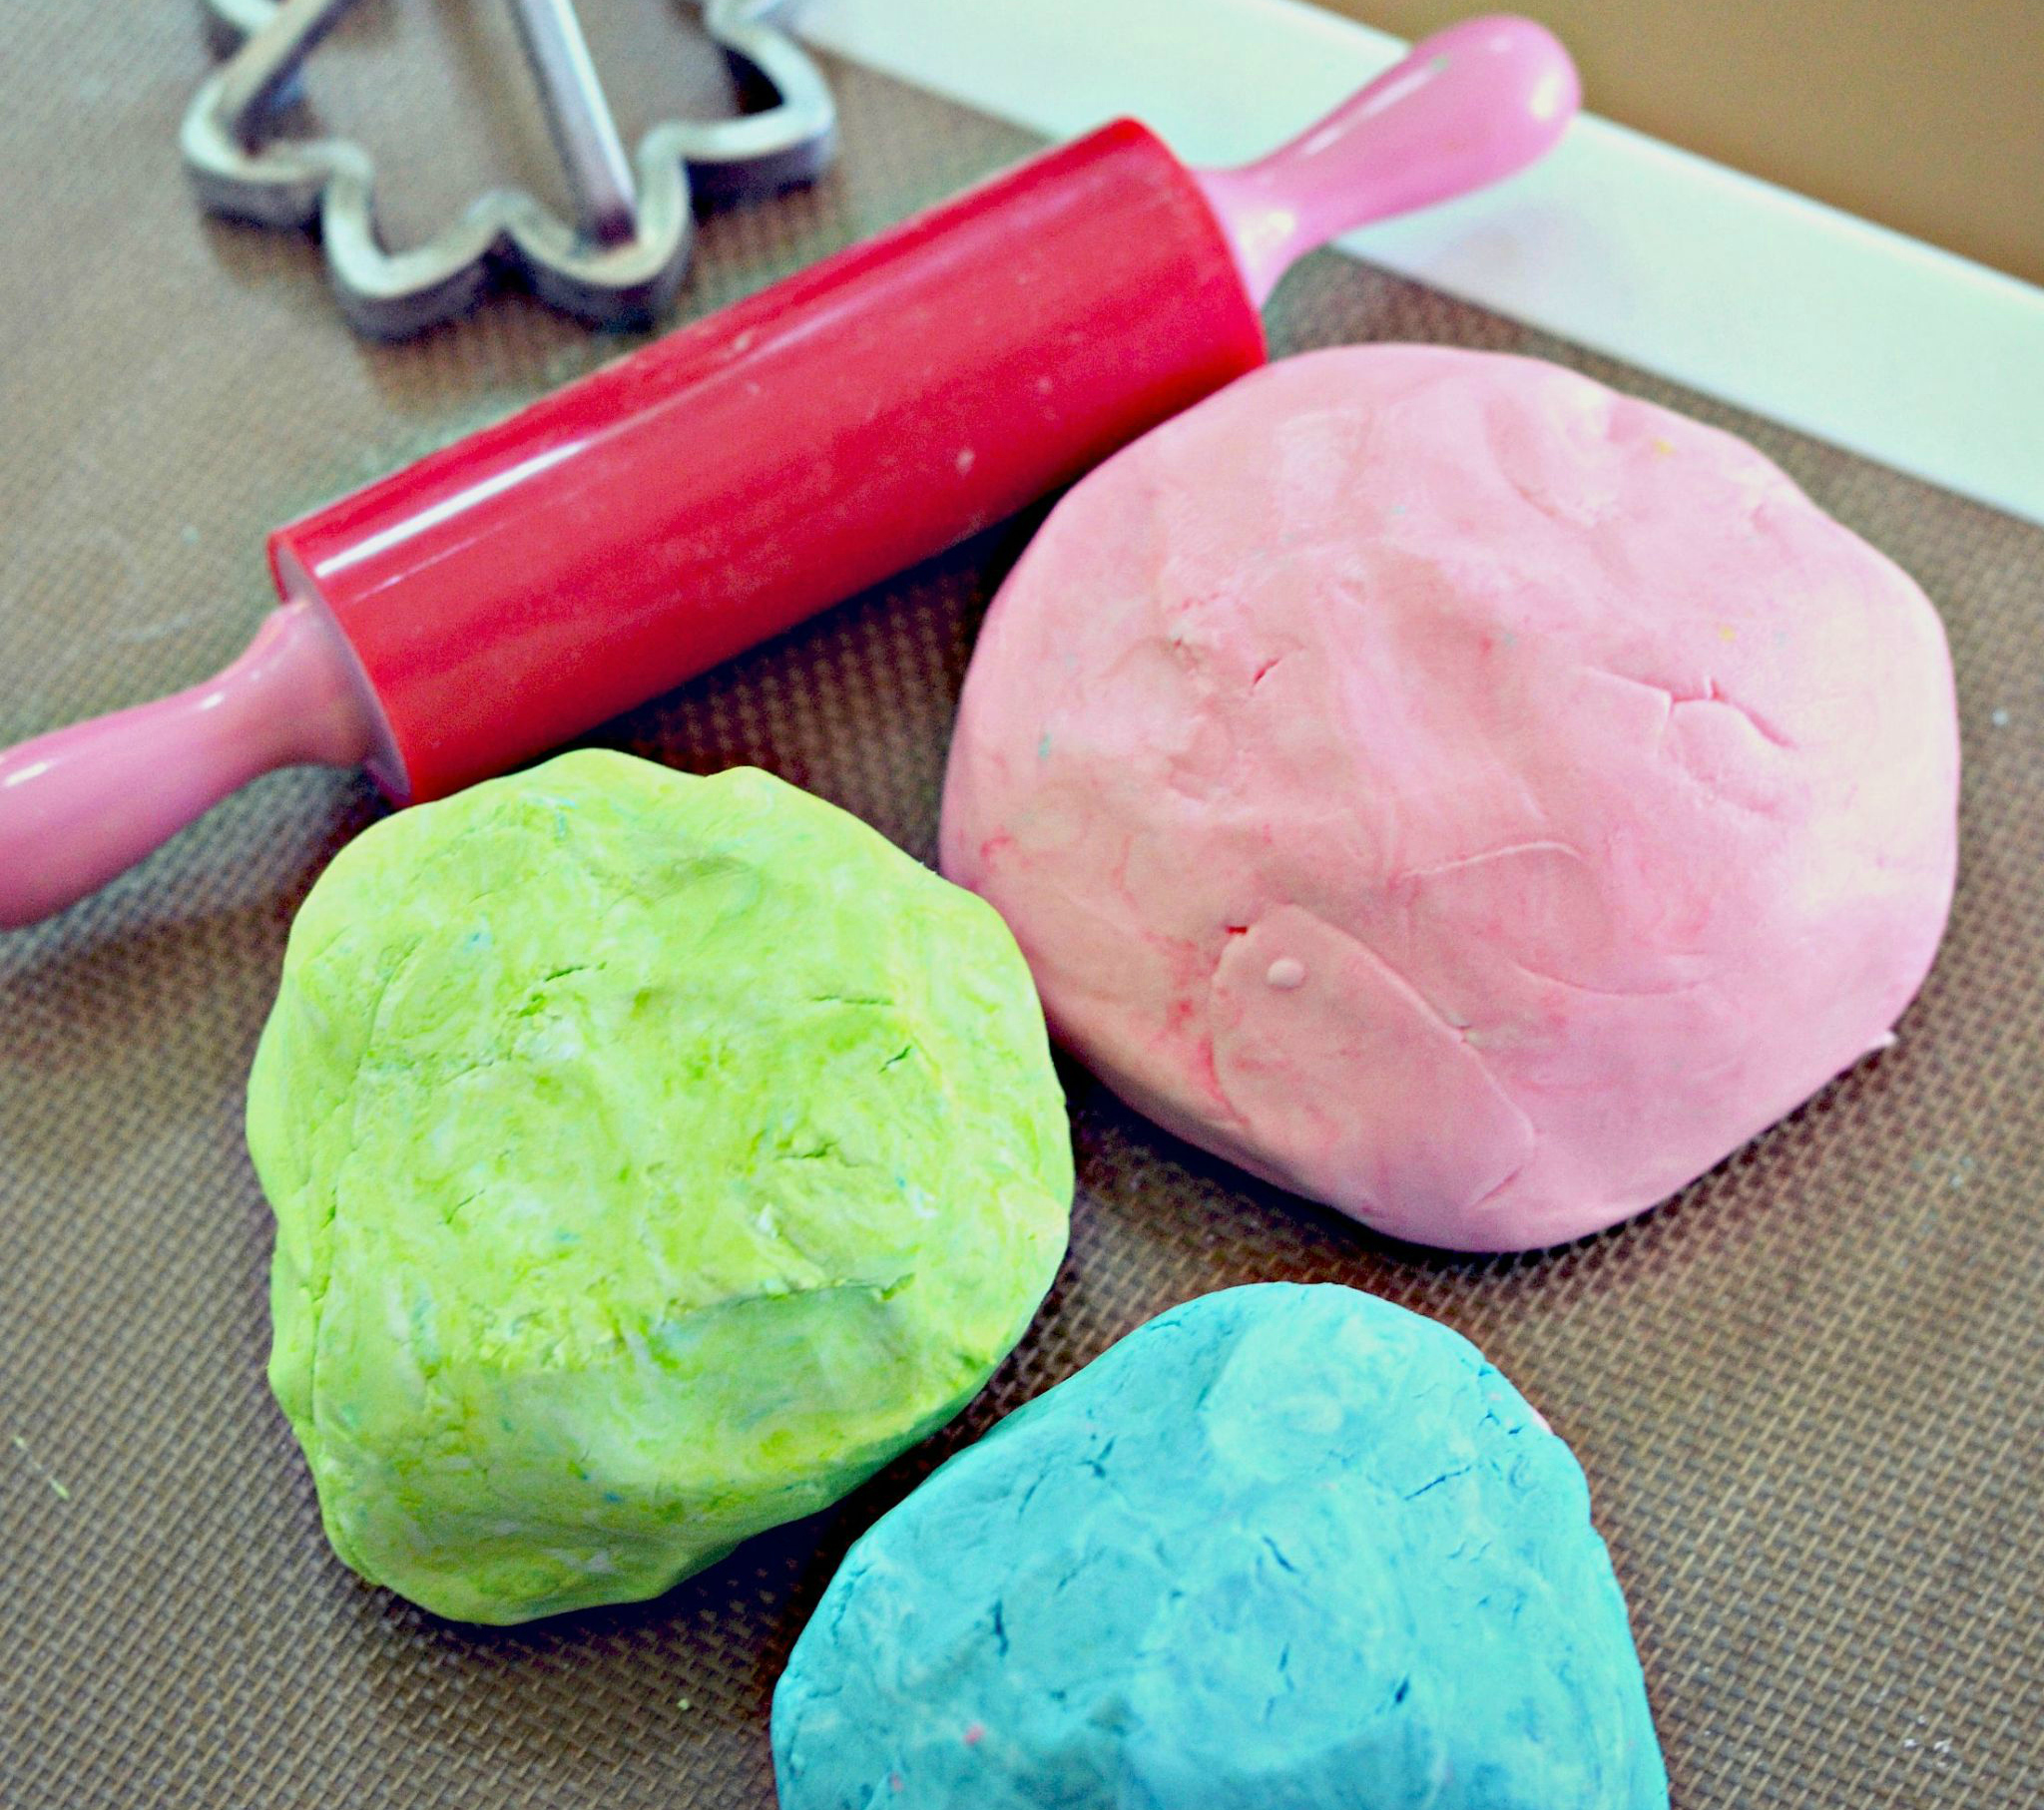 play doh in pink, blue, and green